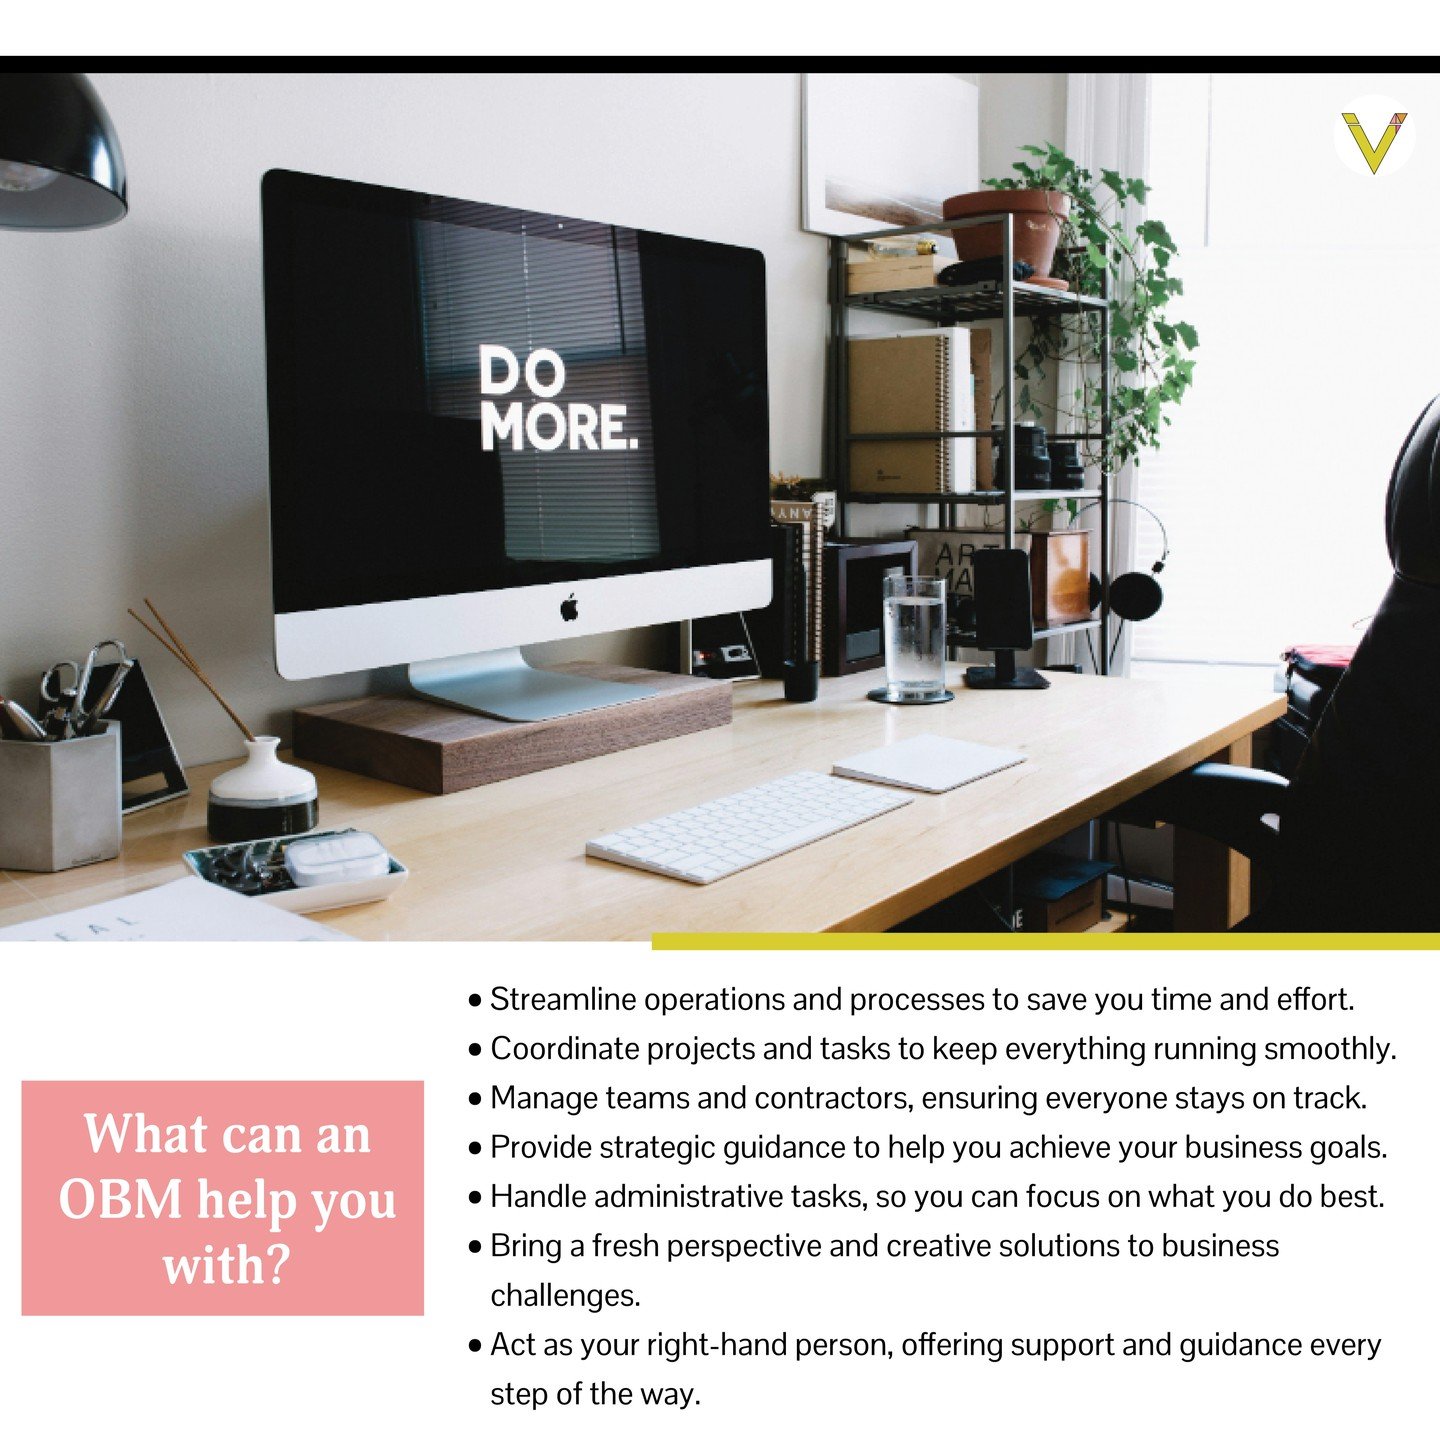 What can an OBM help you with? From tackling tasks to maximizing growth, an OBM is your ultimate business ally! ✨ #onlinebusinessmanager #businesssuccess #vivaobm #heretohelp #growyourbusiness